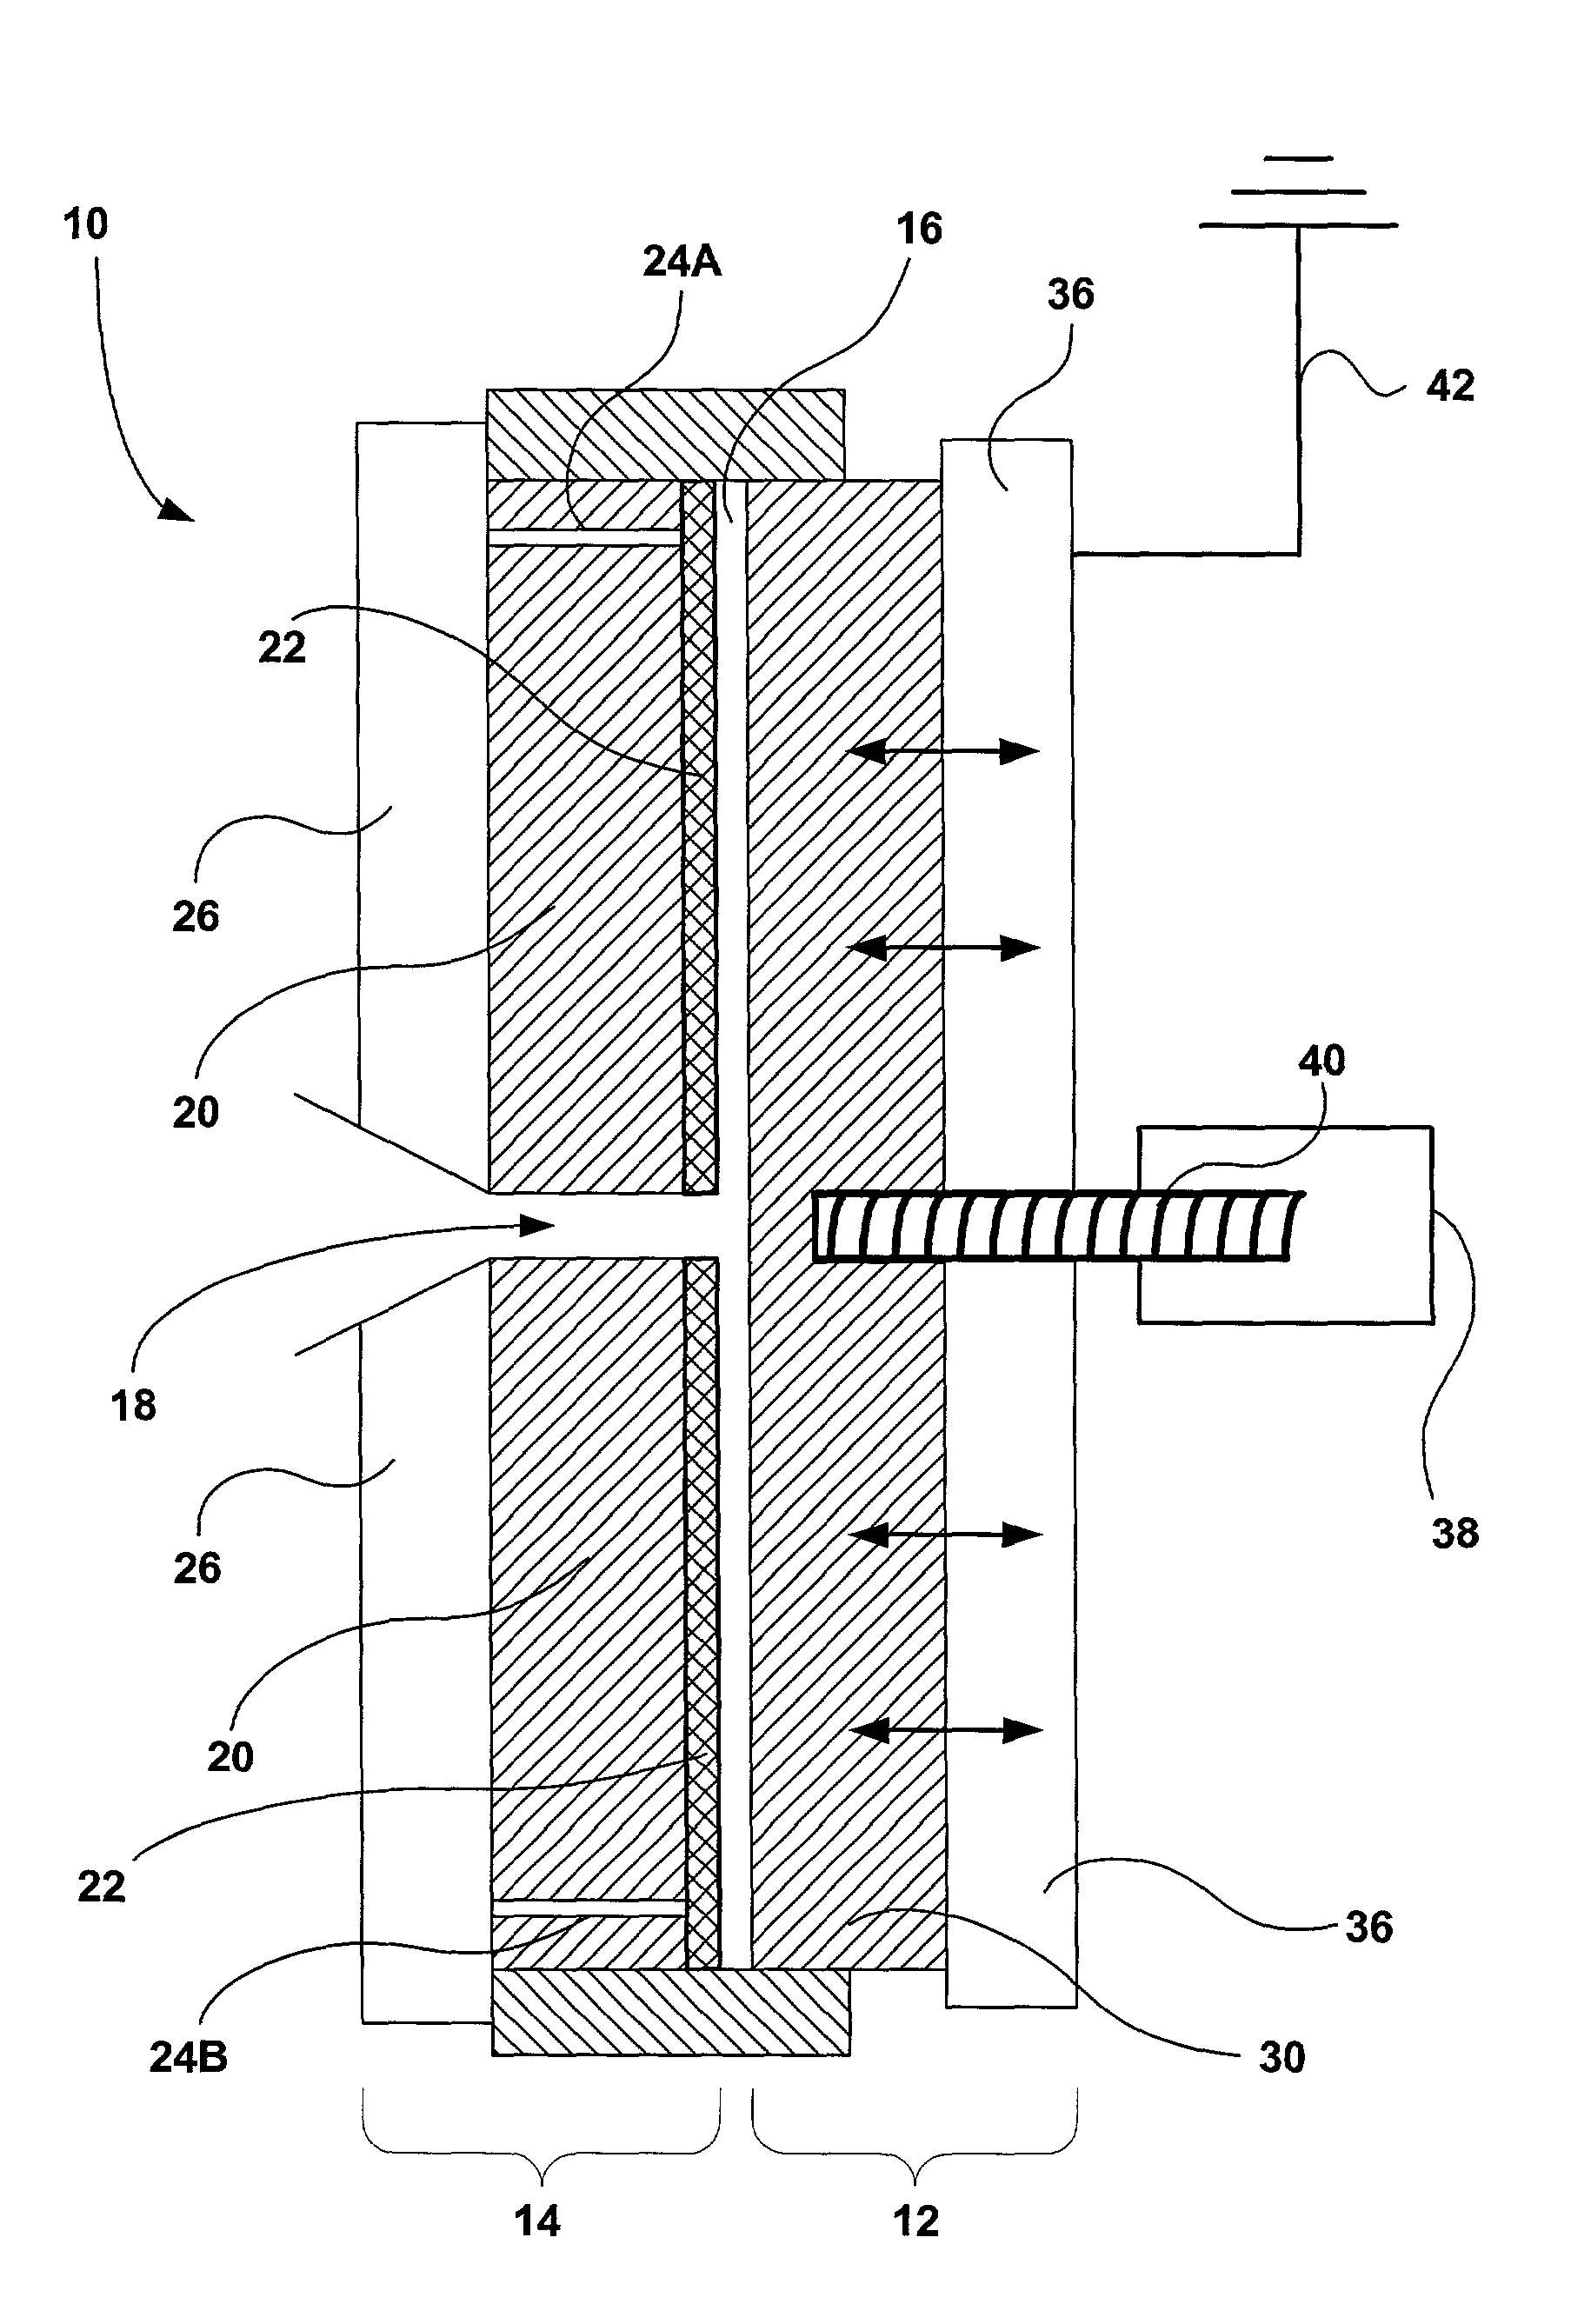 Grounded molding tool for manufacture of optical components